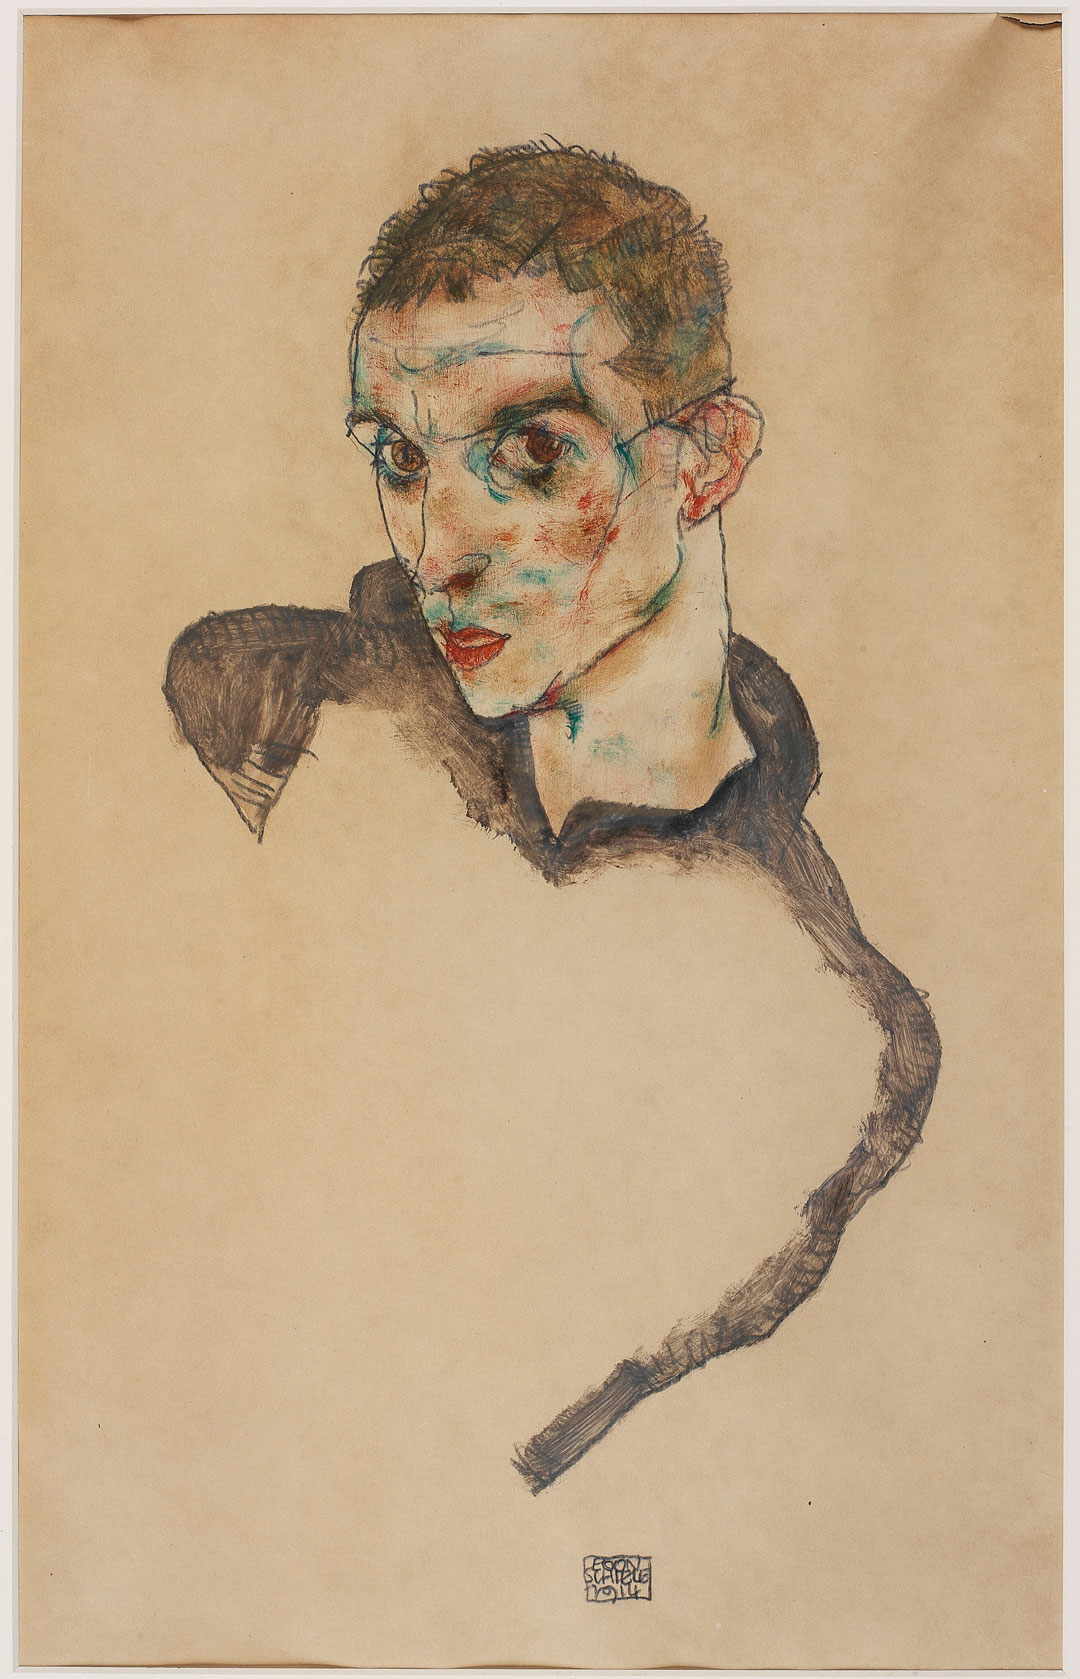 Self-Portrait (1914) by Egon Schiele. All images courtesy of the Tate